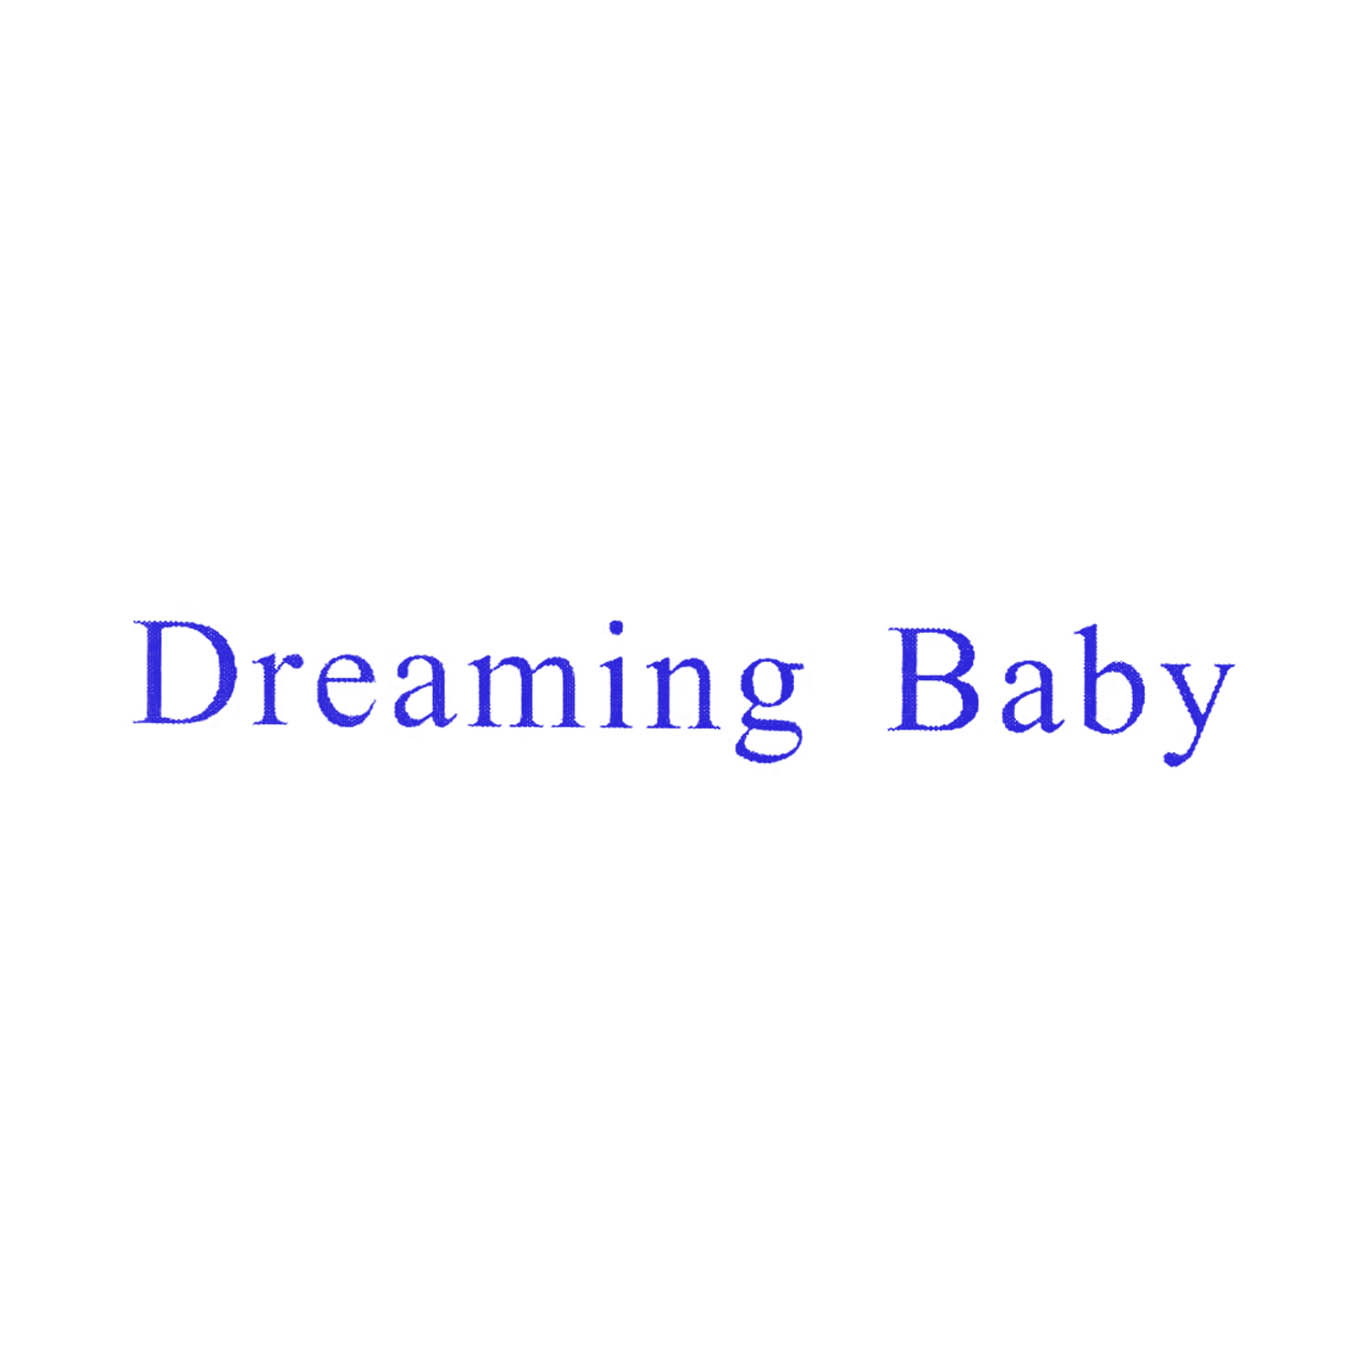 DREAMING BABY